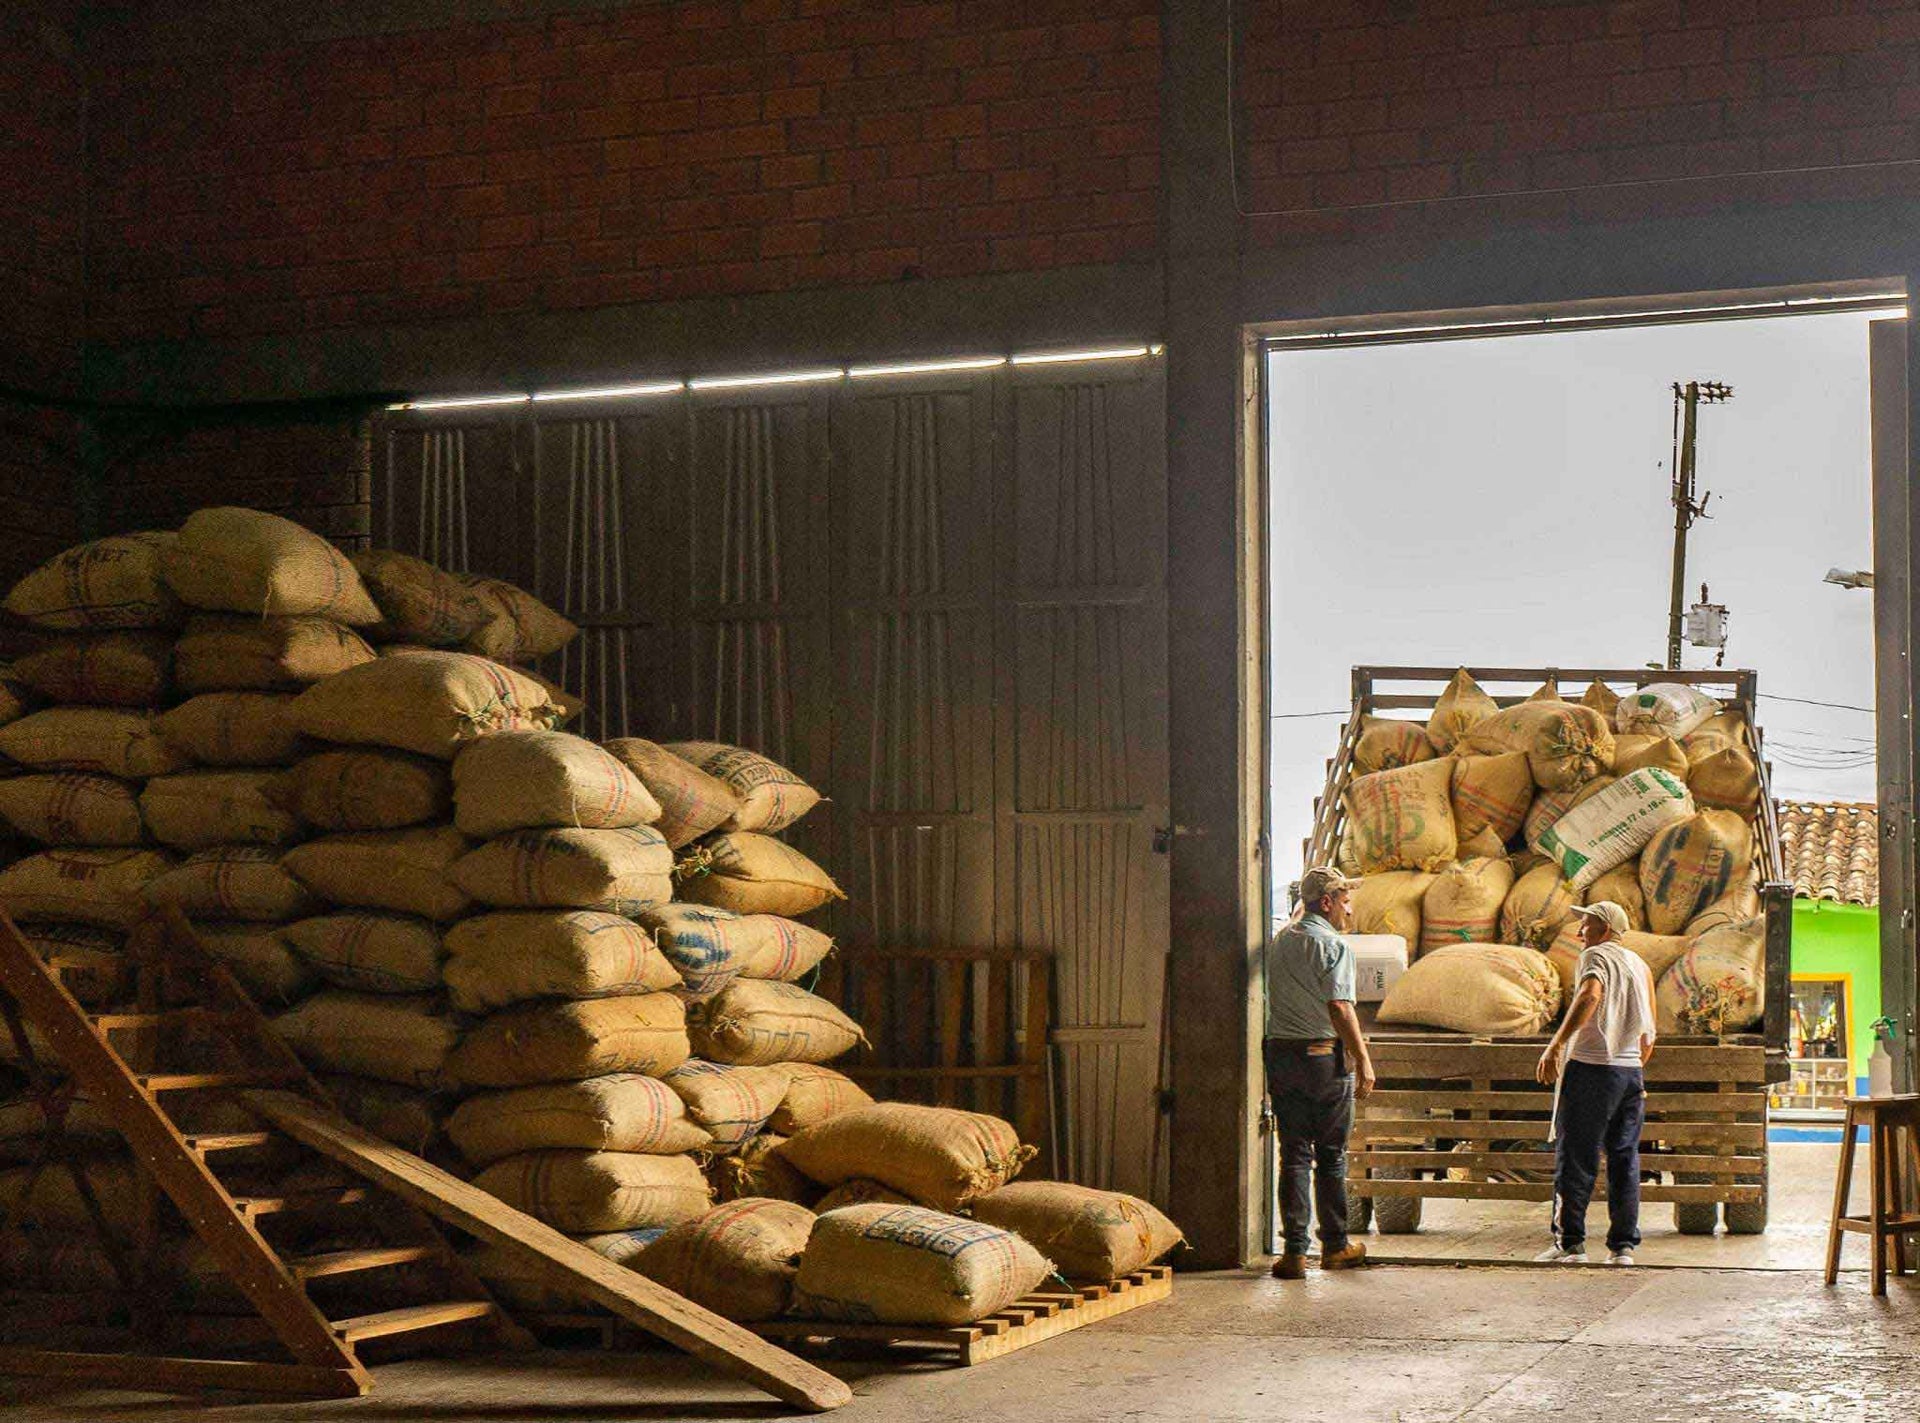 The Amazing Supply Chain of Your Morning Coffee